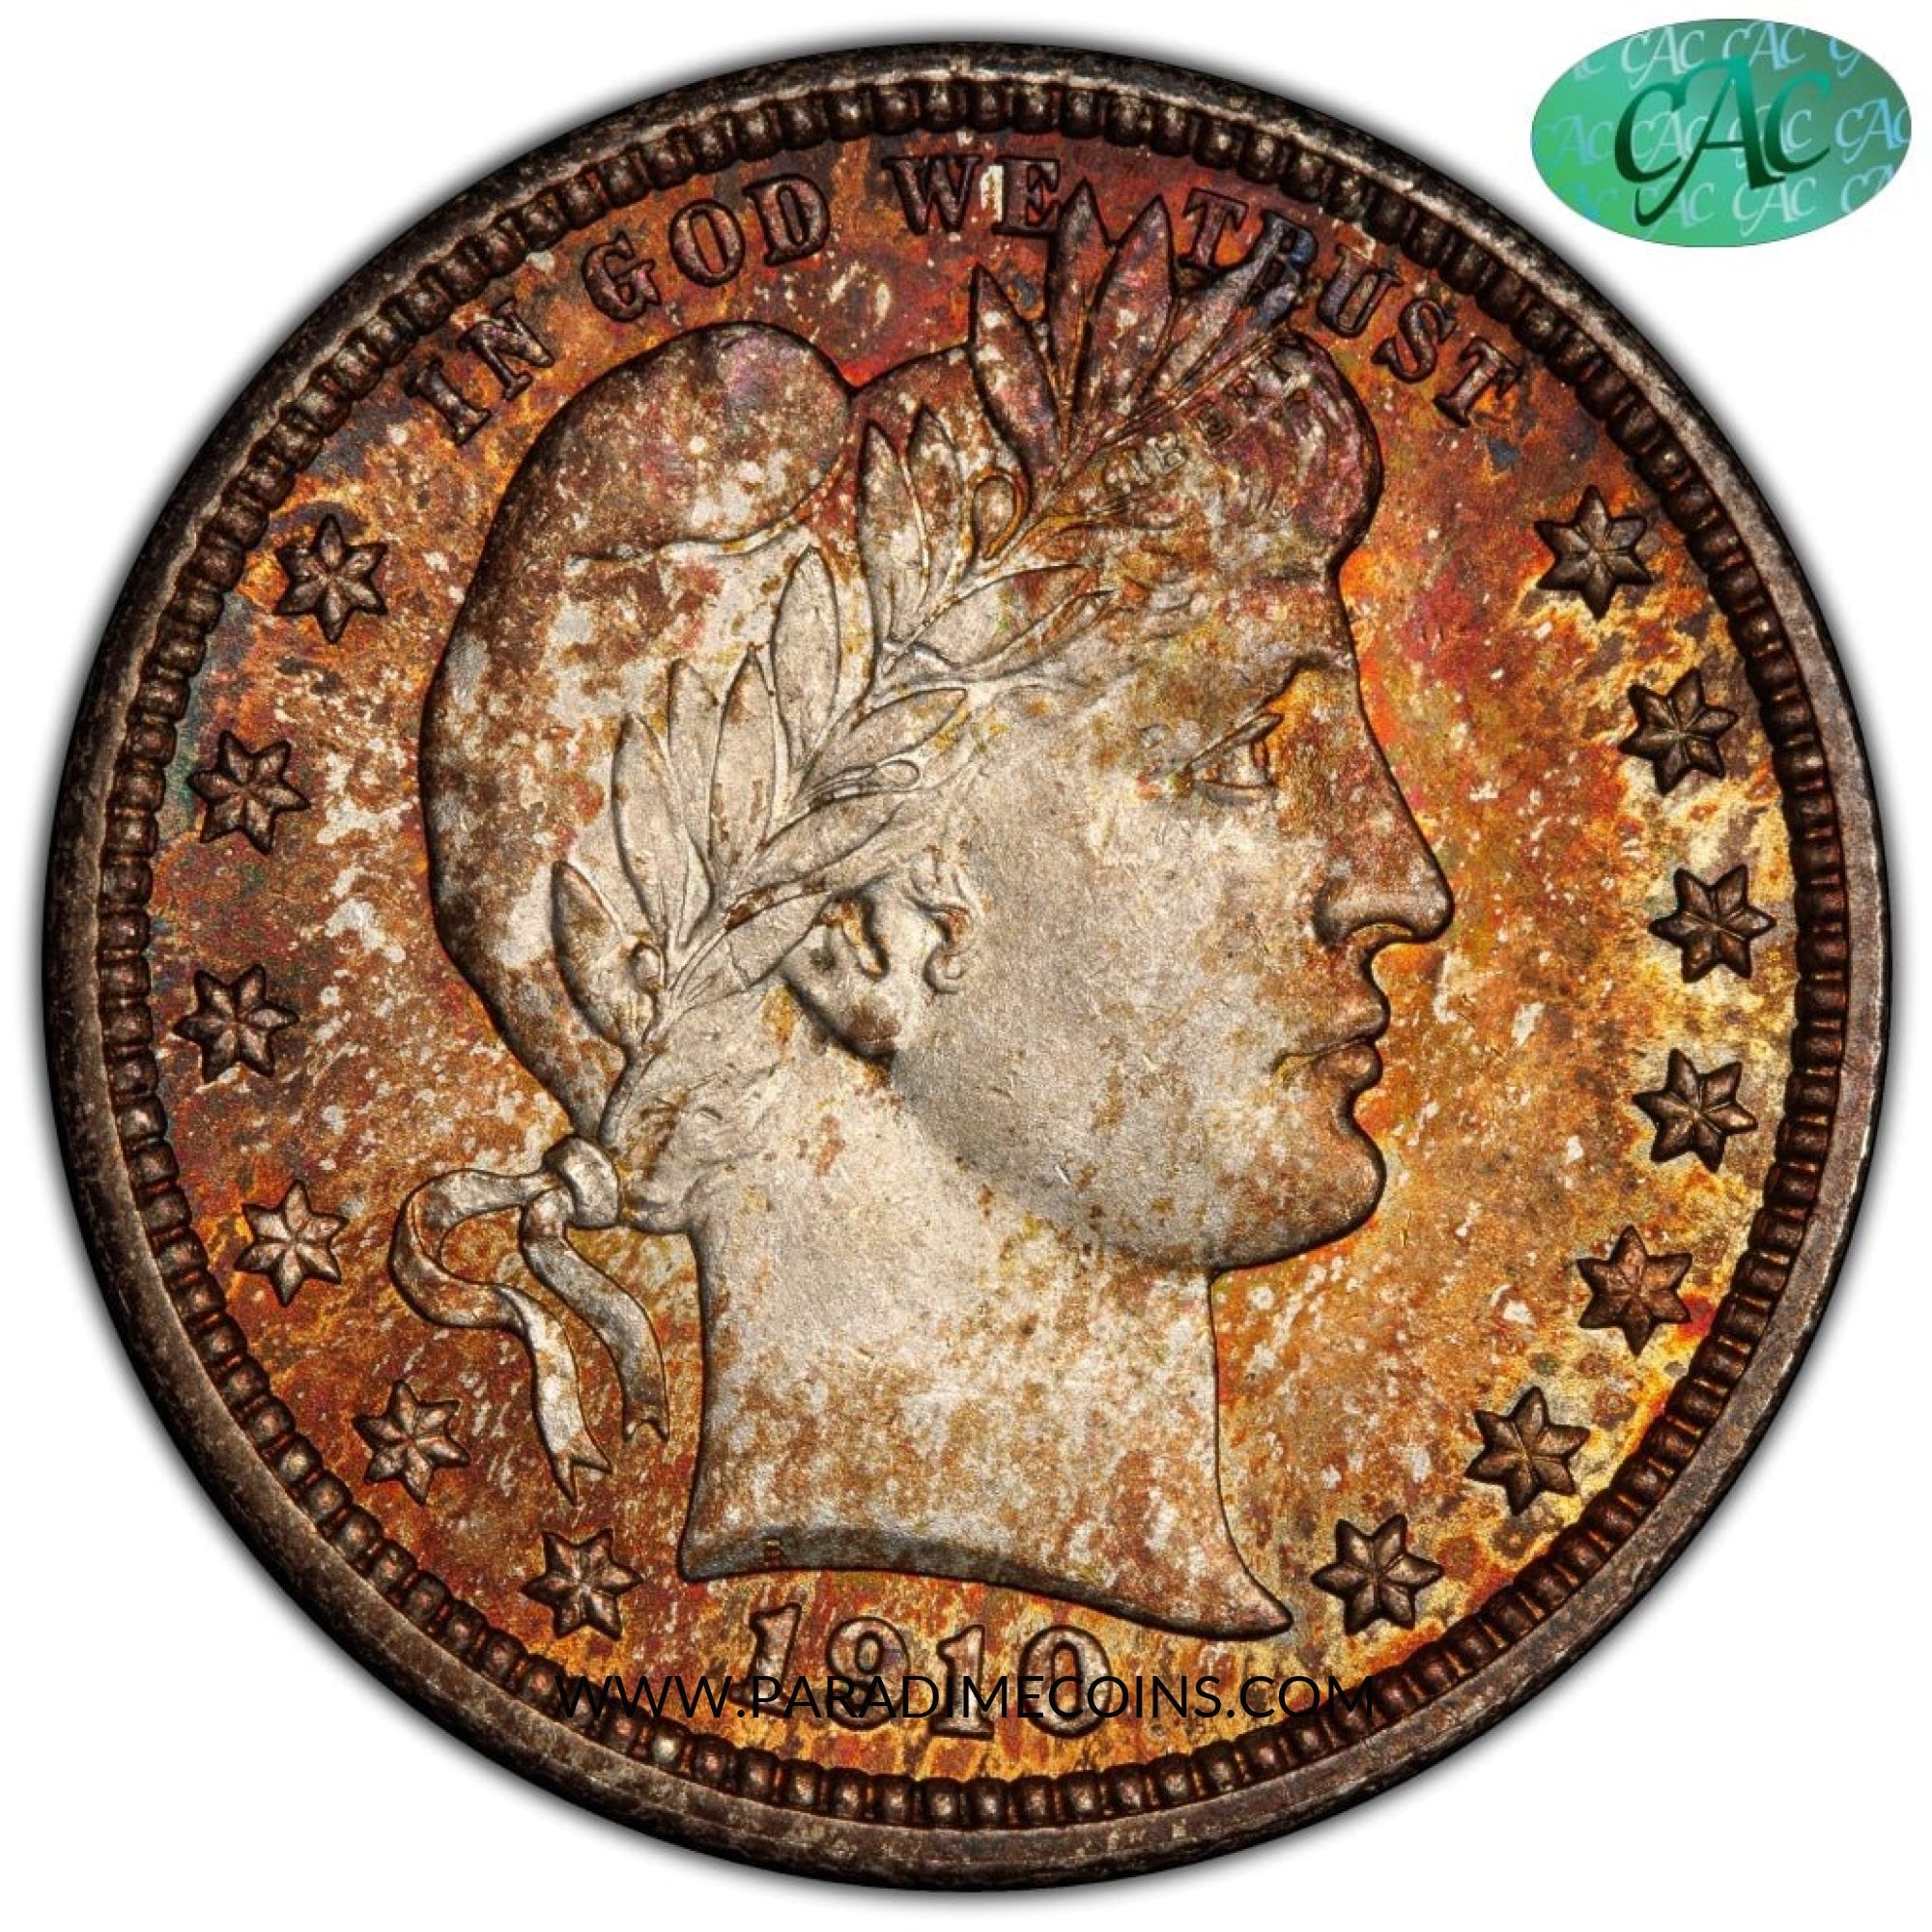 1910 25C MS66+ PCGS CAC - Paradime Coins | PCGS NGC CACG CAC Rare US Numismatic Coins For Sale